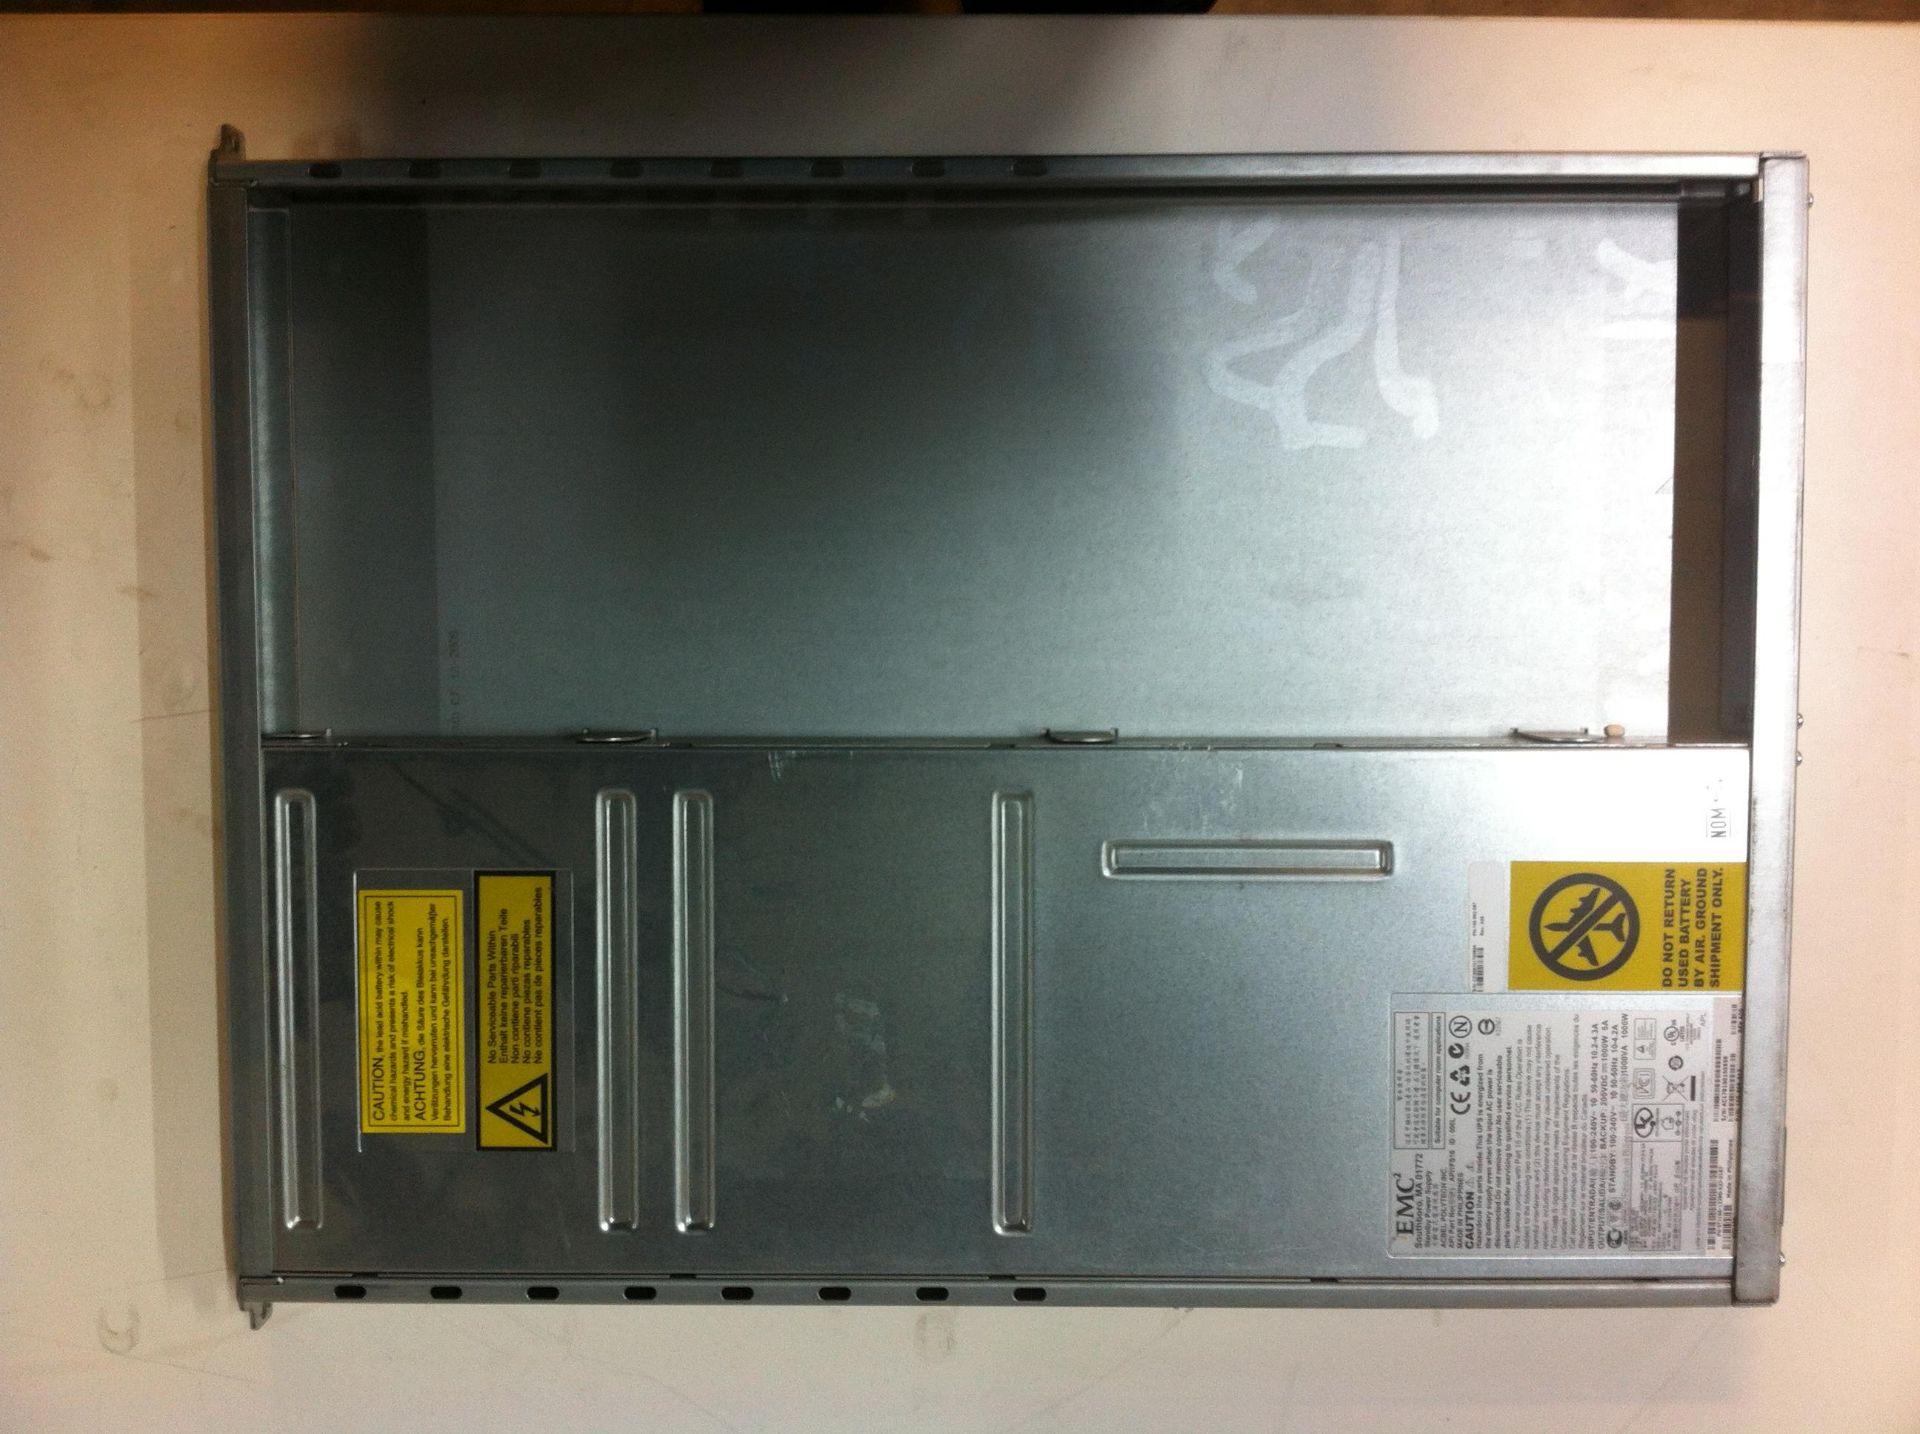 Unbranded standby power supply for server